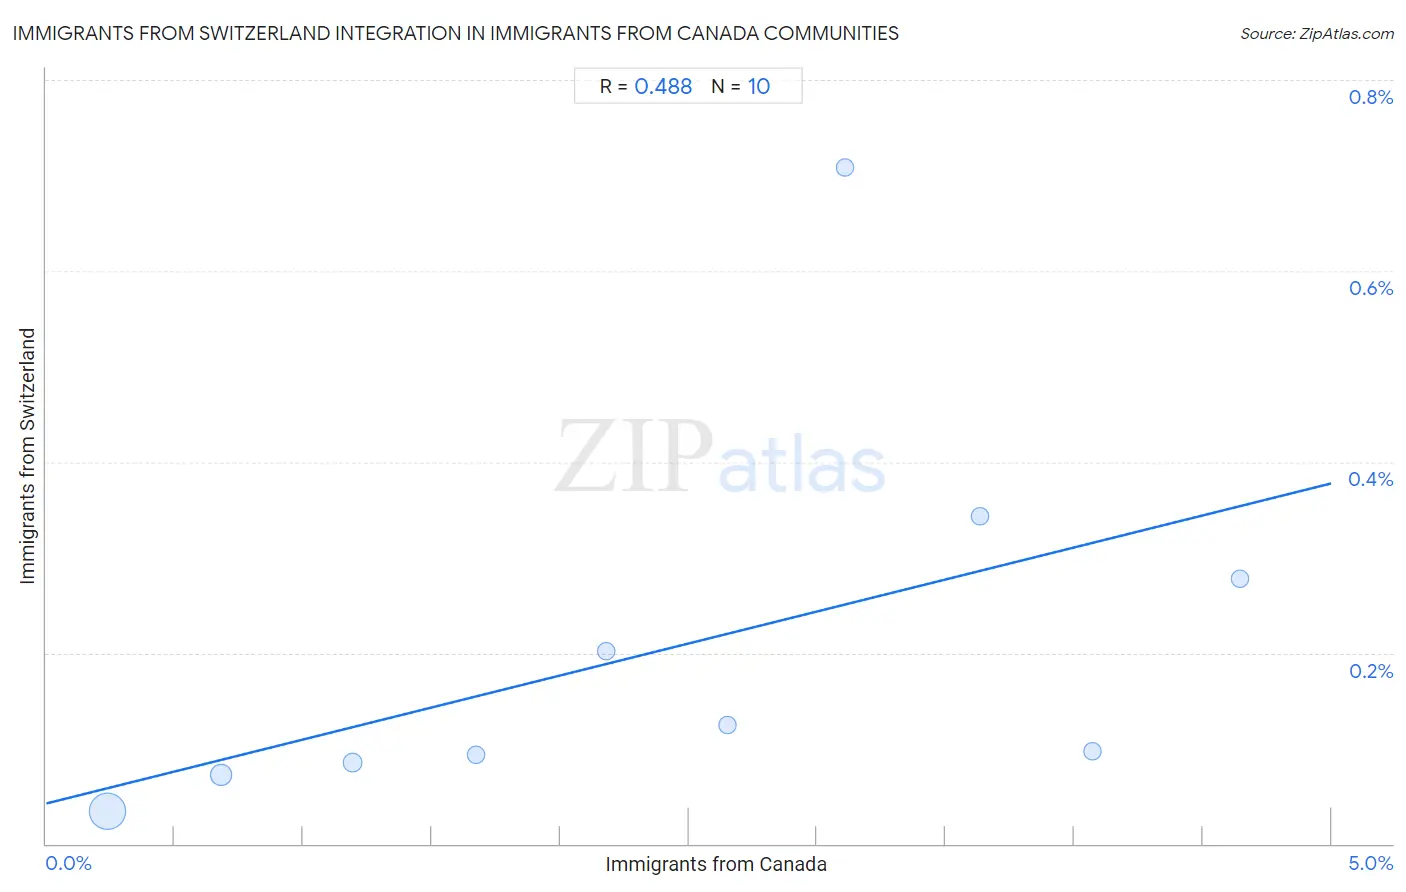 Immigrants from Canada Integration in Immigrants from Switzerland Communities